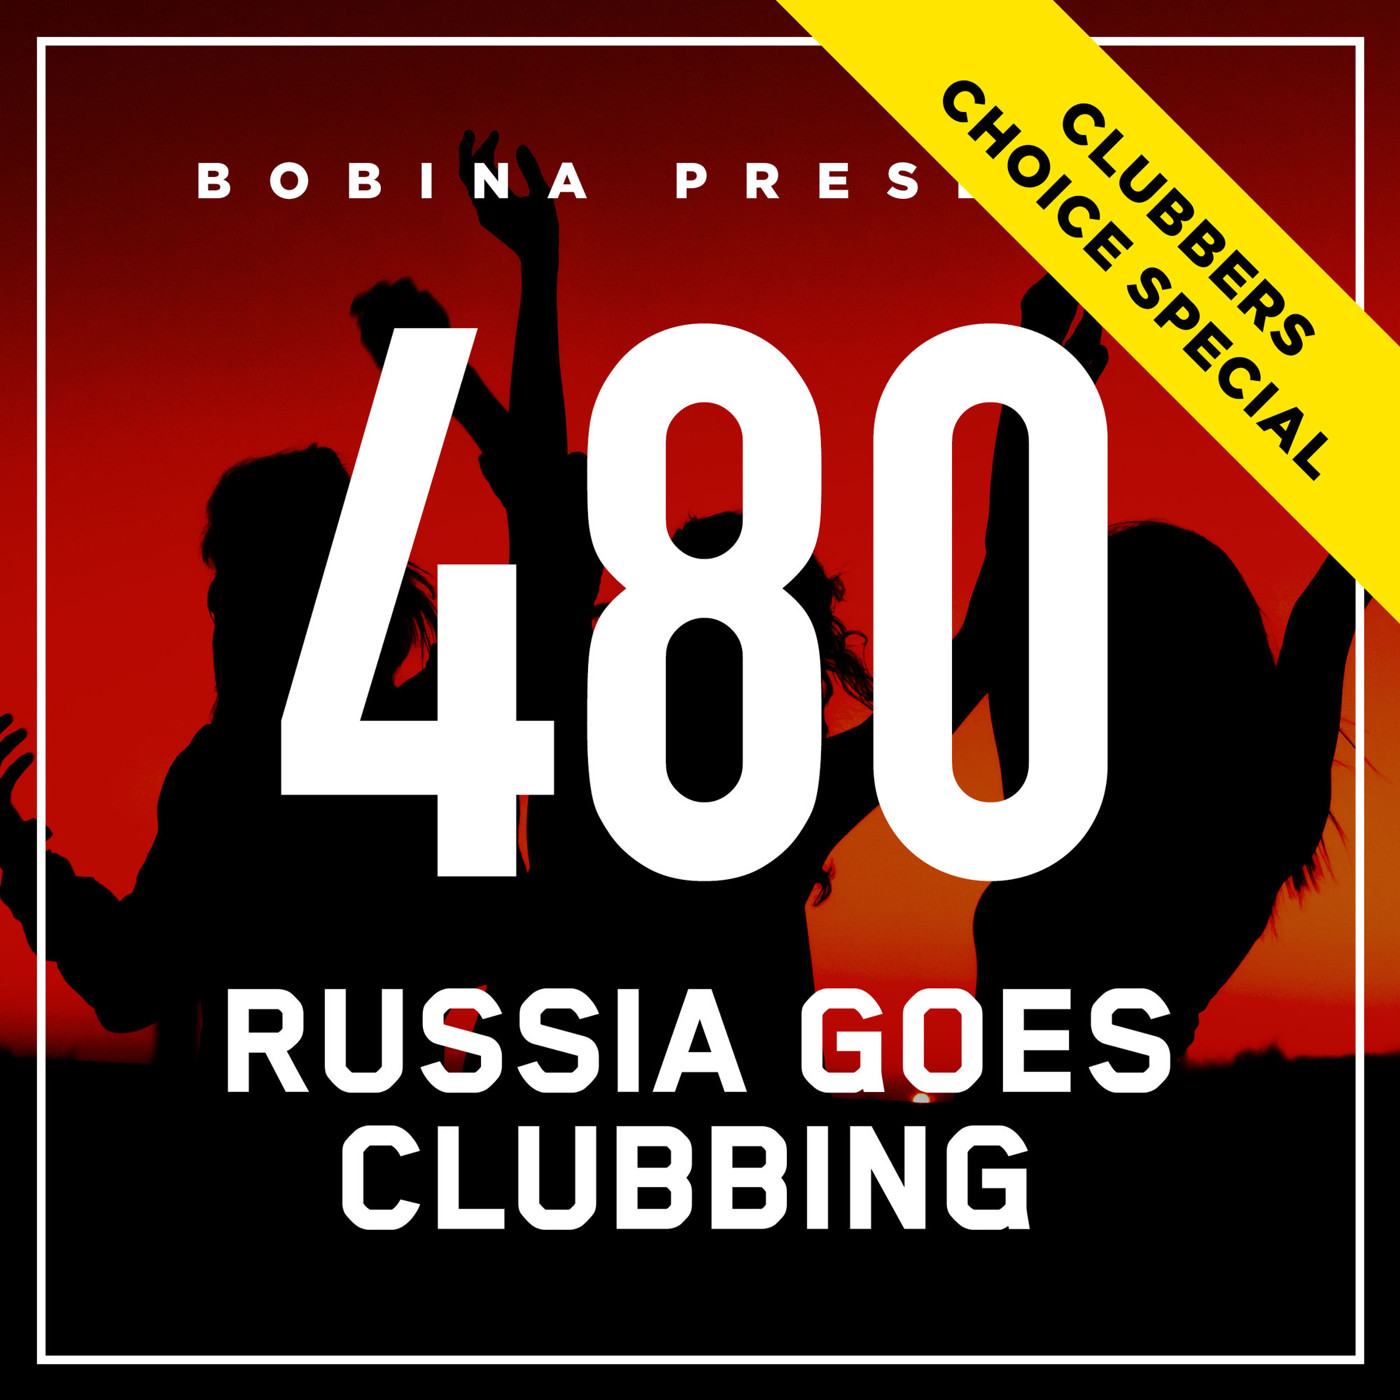 Bobina – Nr. 480 Russia Goes Clubbing [Clubbers Choice Special] (Rus)